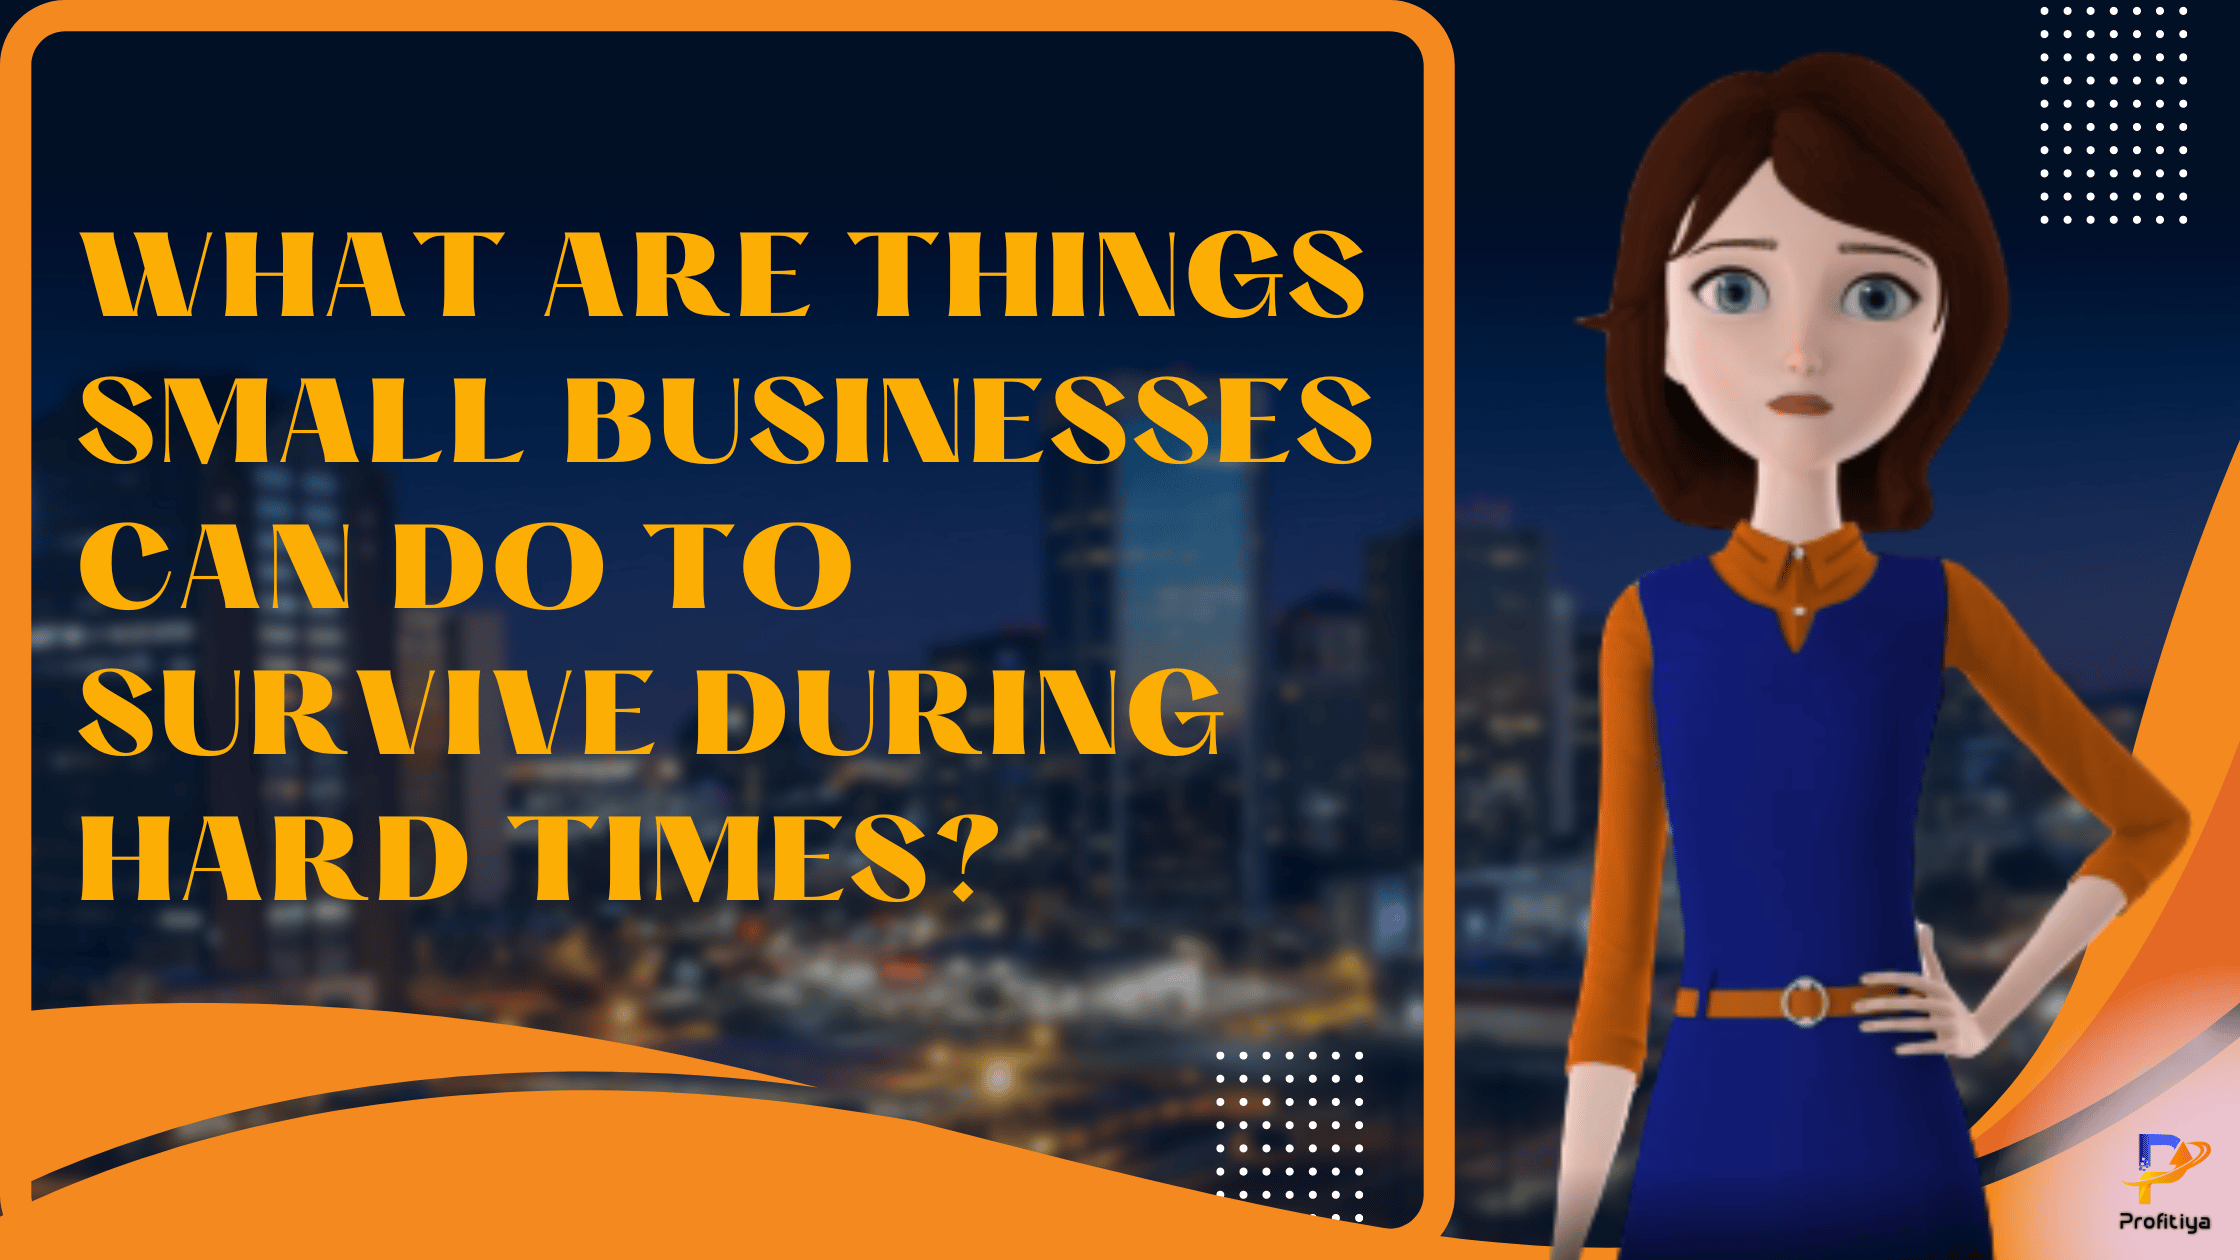 What Are Things Small Businesses Can Do To Survive During Hard Times?